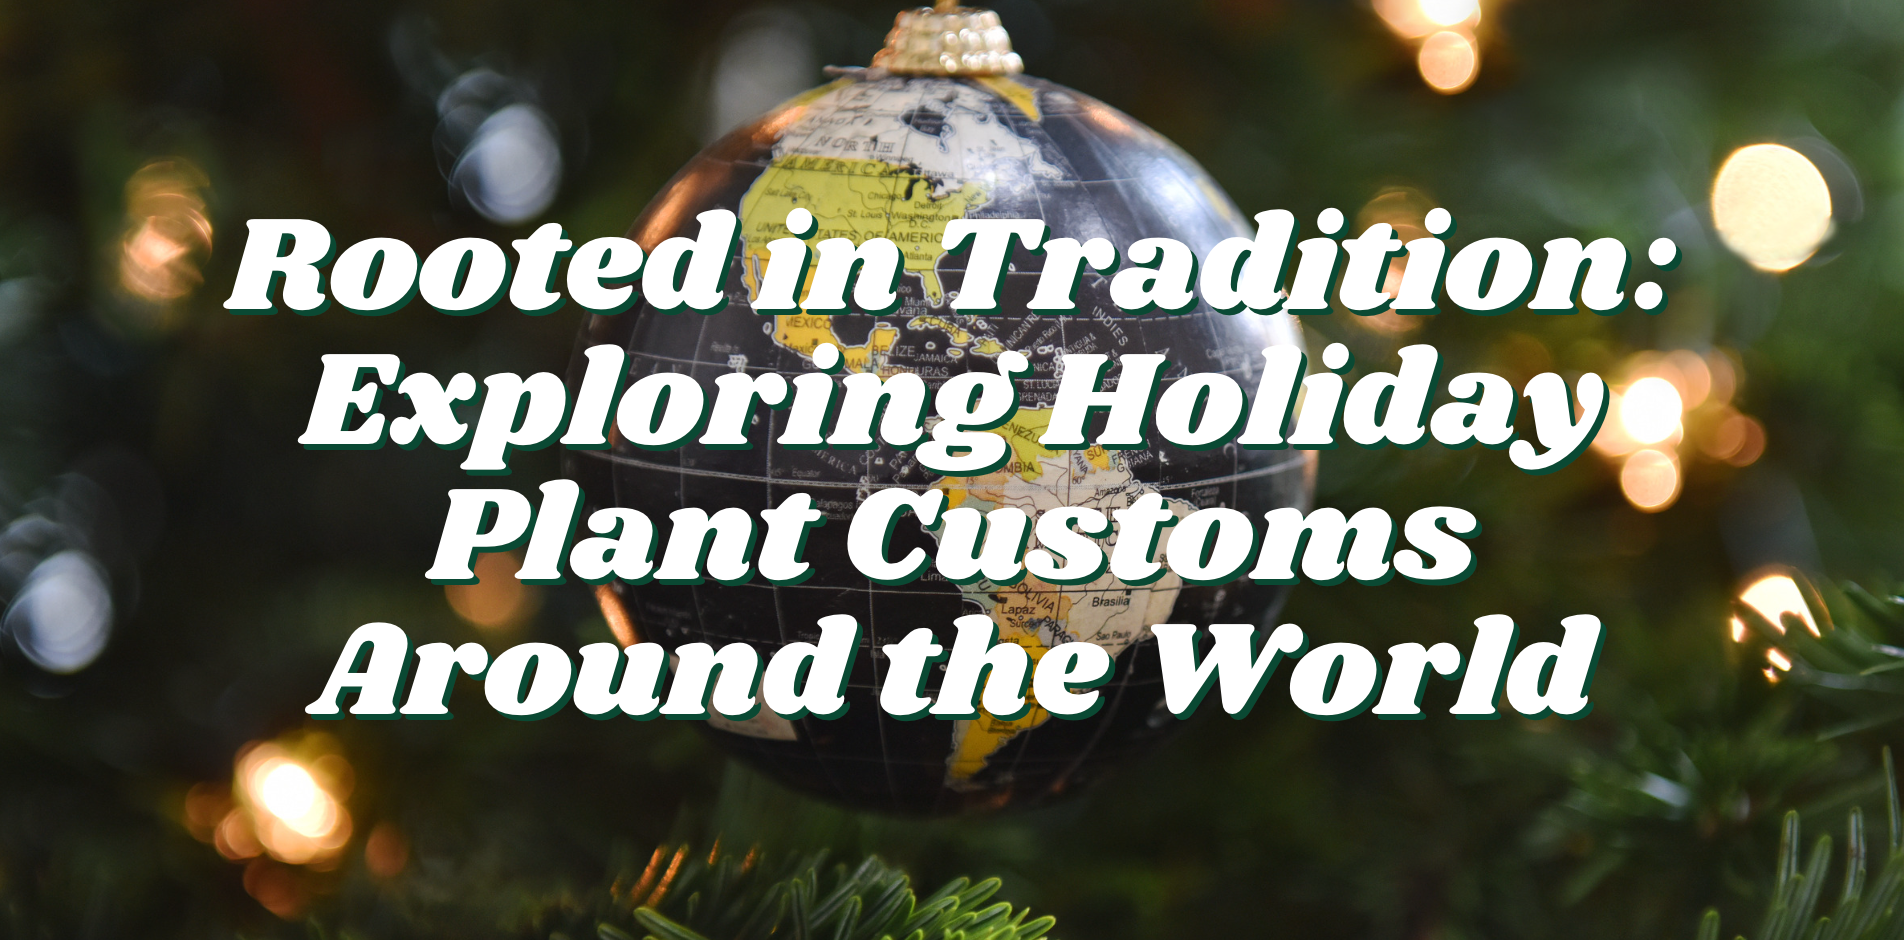 Rooted in Tradition: Exploring Holiday Plant Customs Around the World